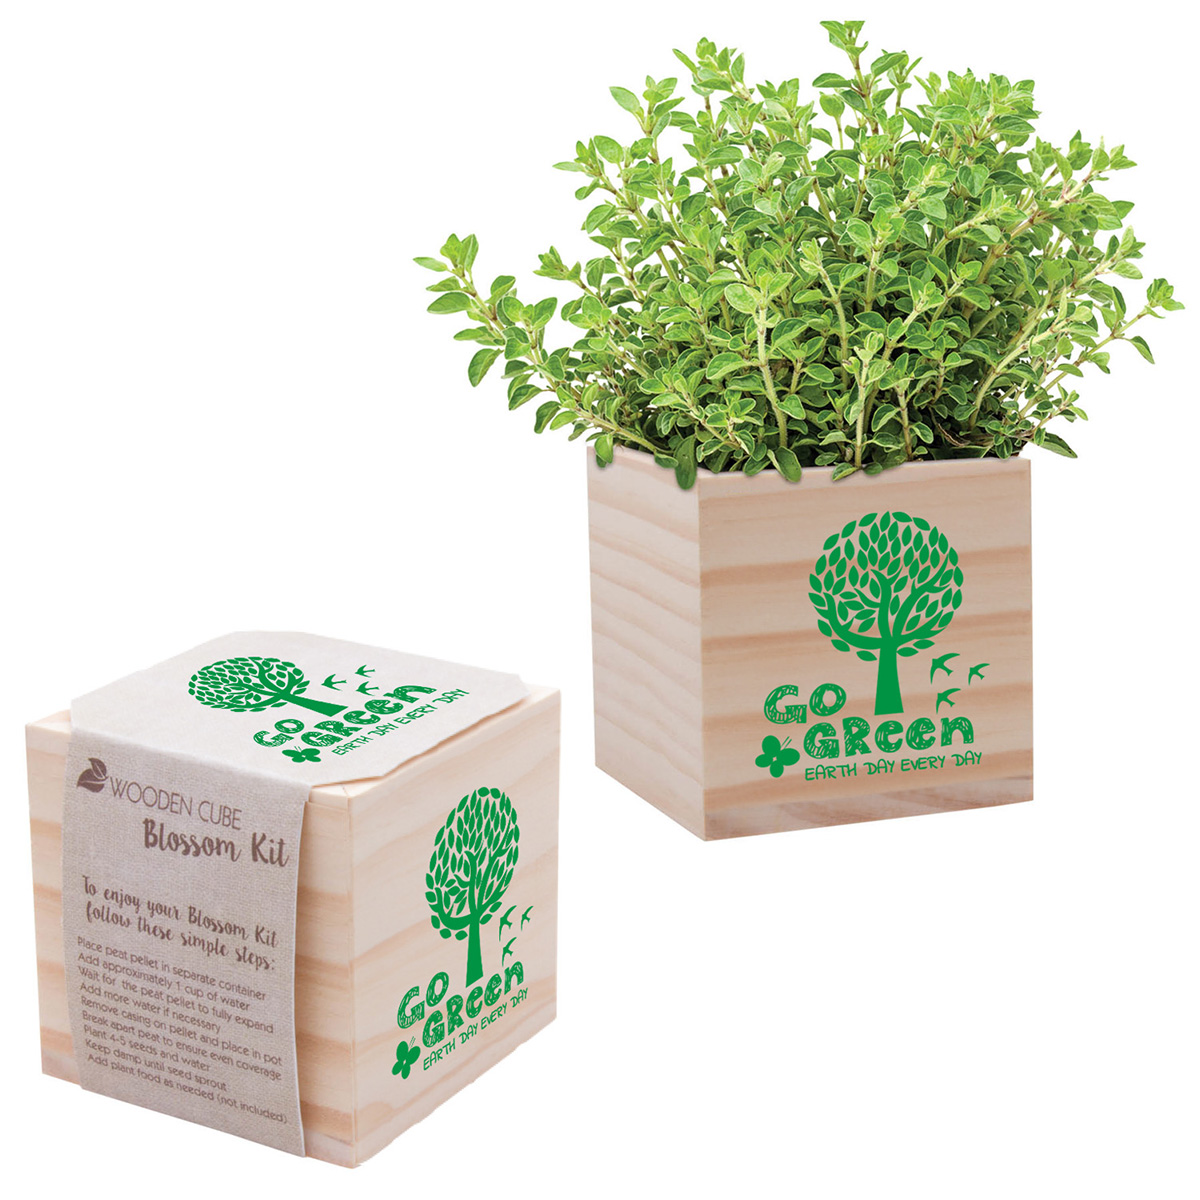 Earth Day Wooden Cube Planting Kit Promotional Product